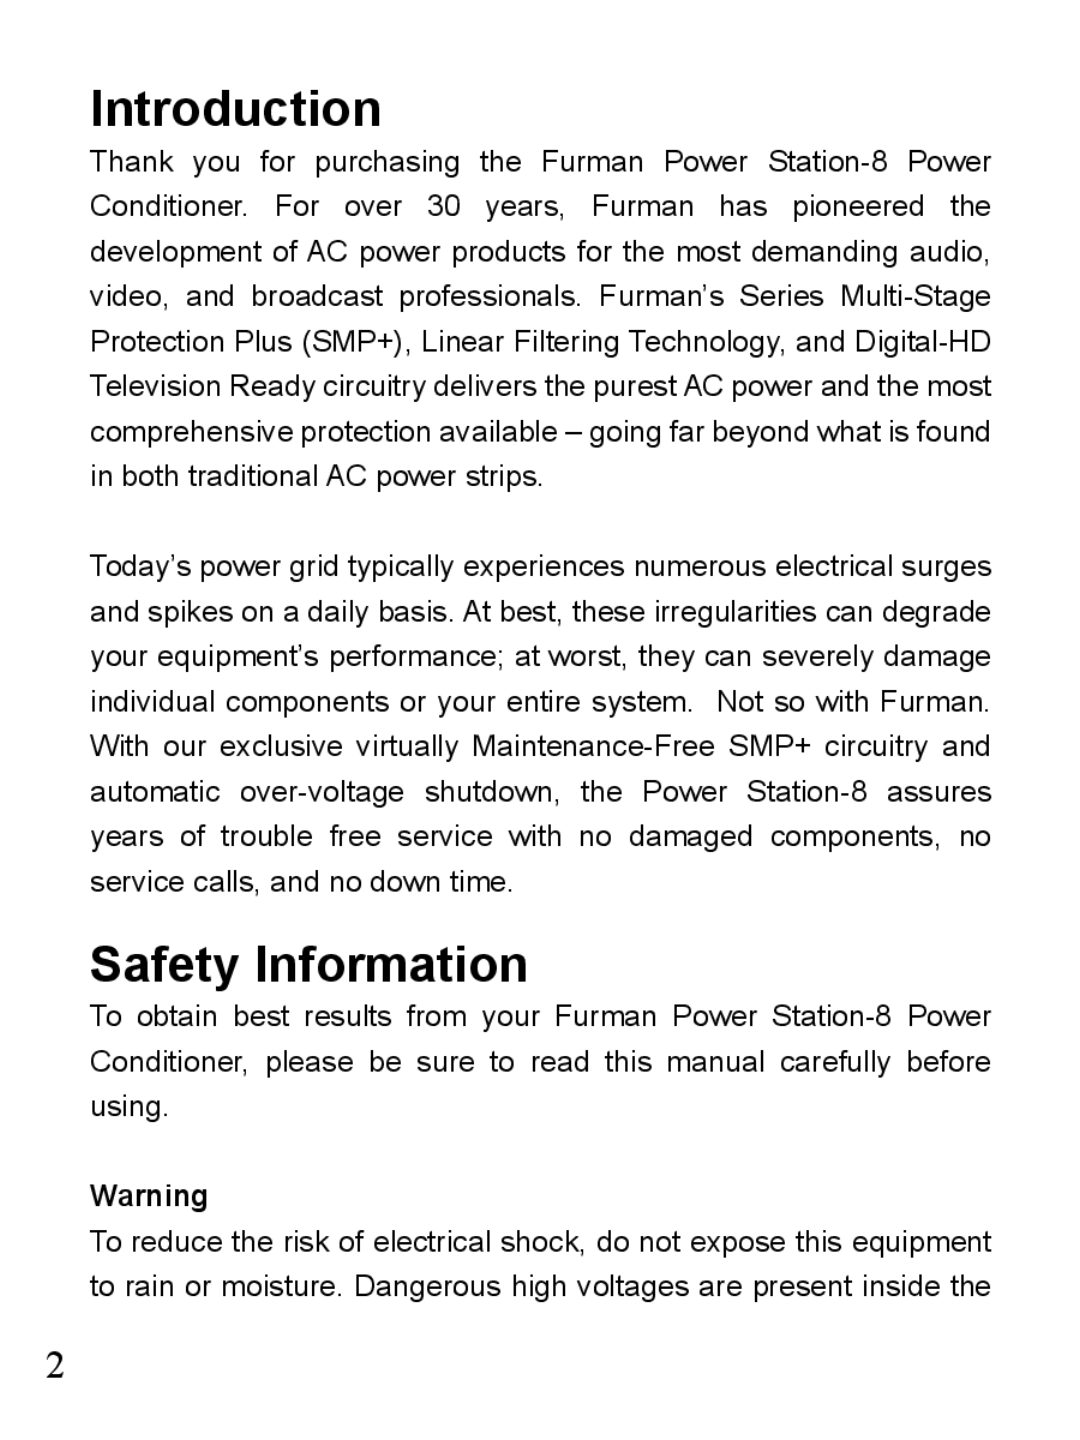 Furman Sound PST-8 owner manual Introduction, Safety Information 